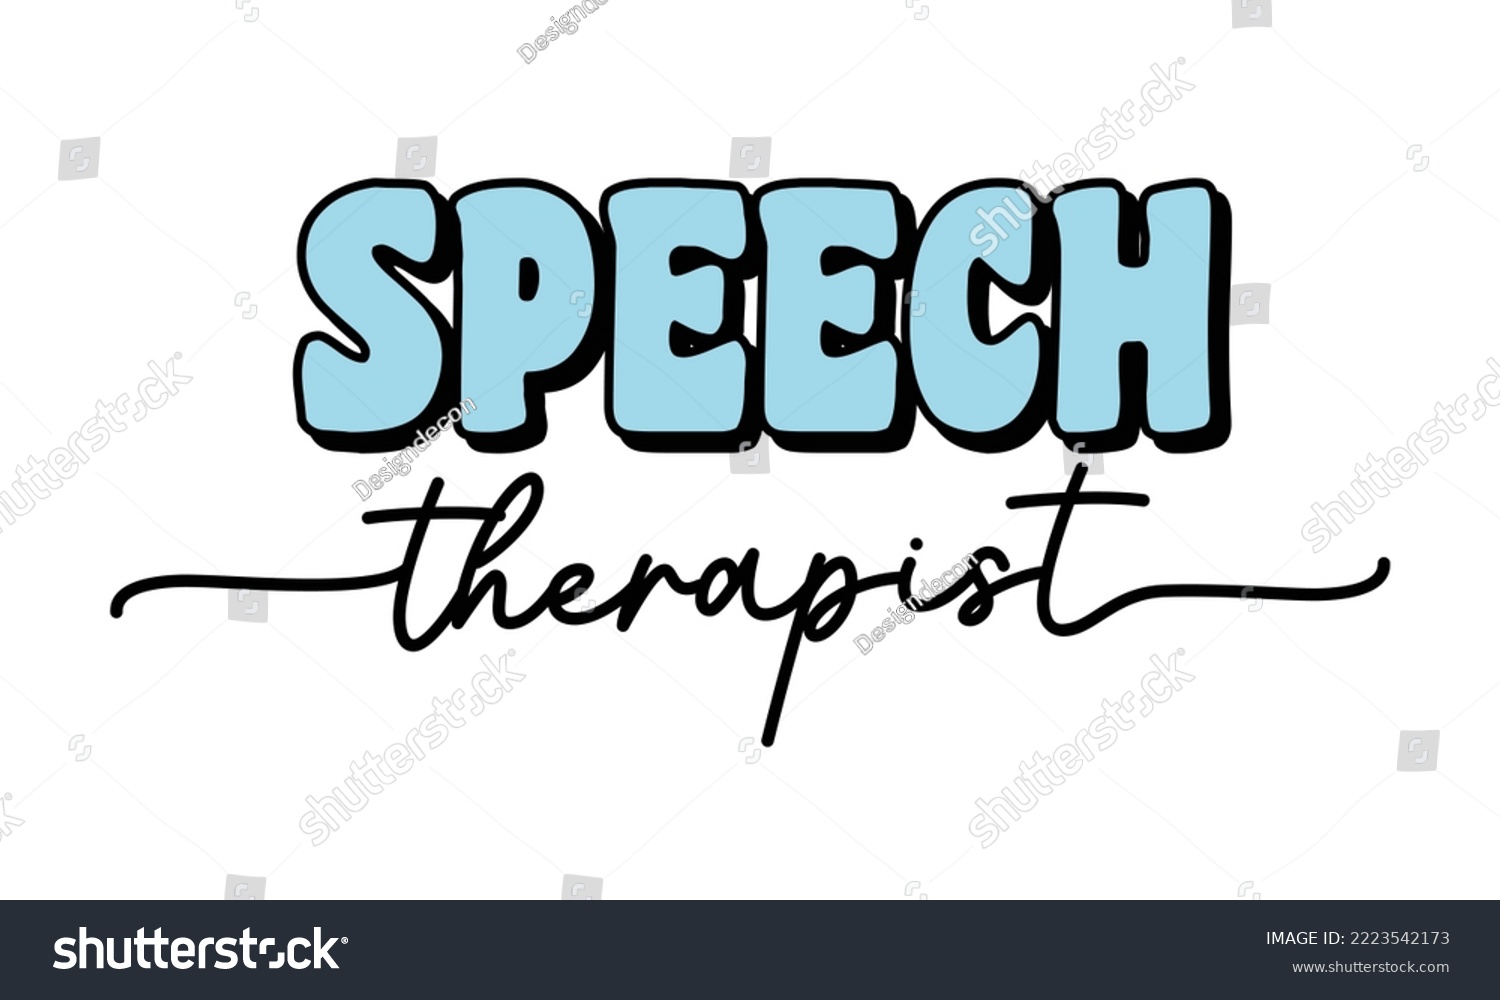 SVG of Speech Therapist Medical Career quote retro groovy typography sublimation SVG on white background svg